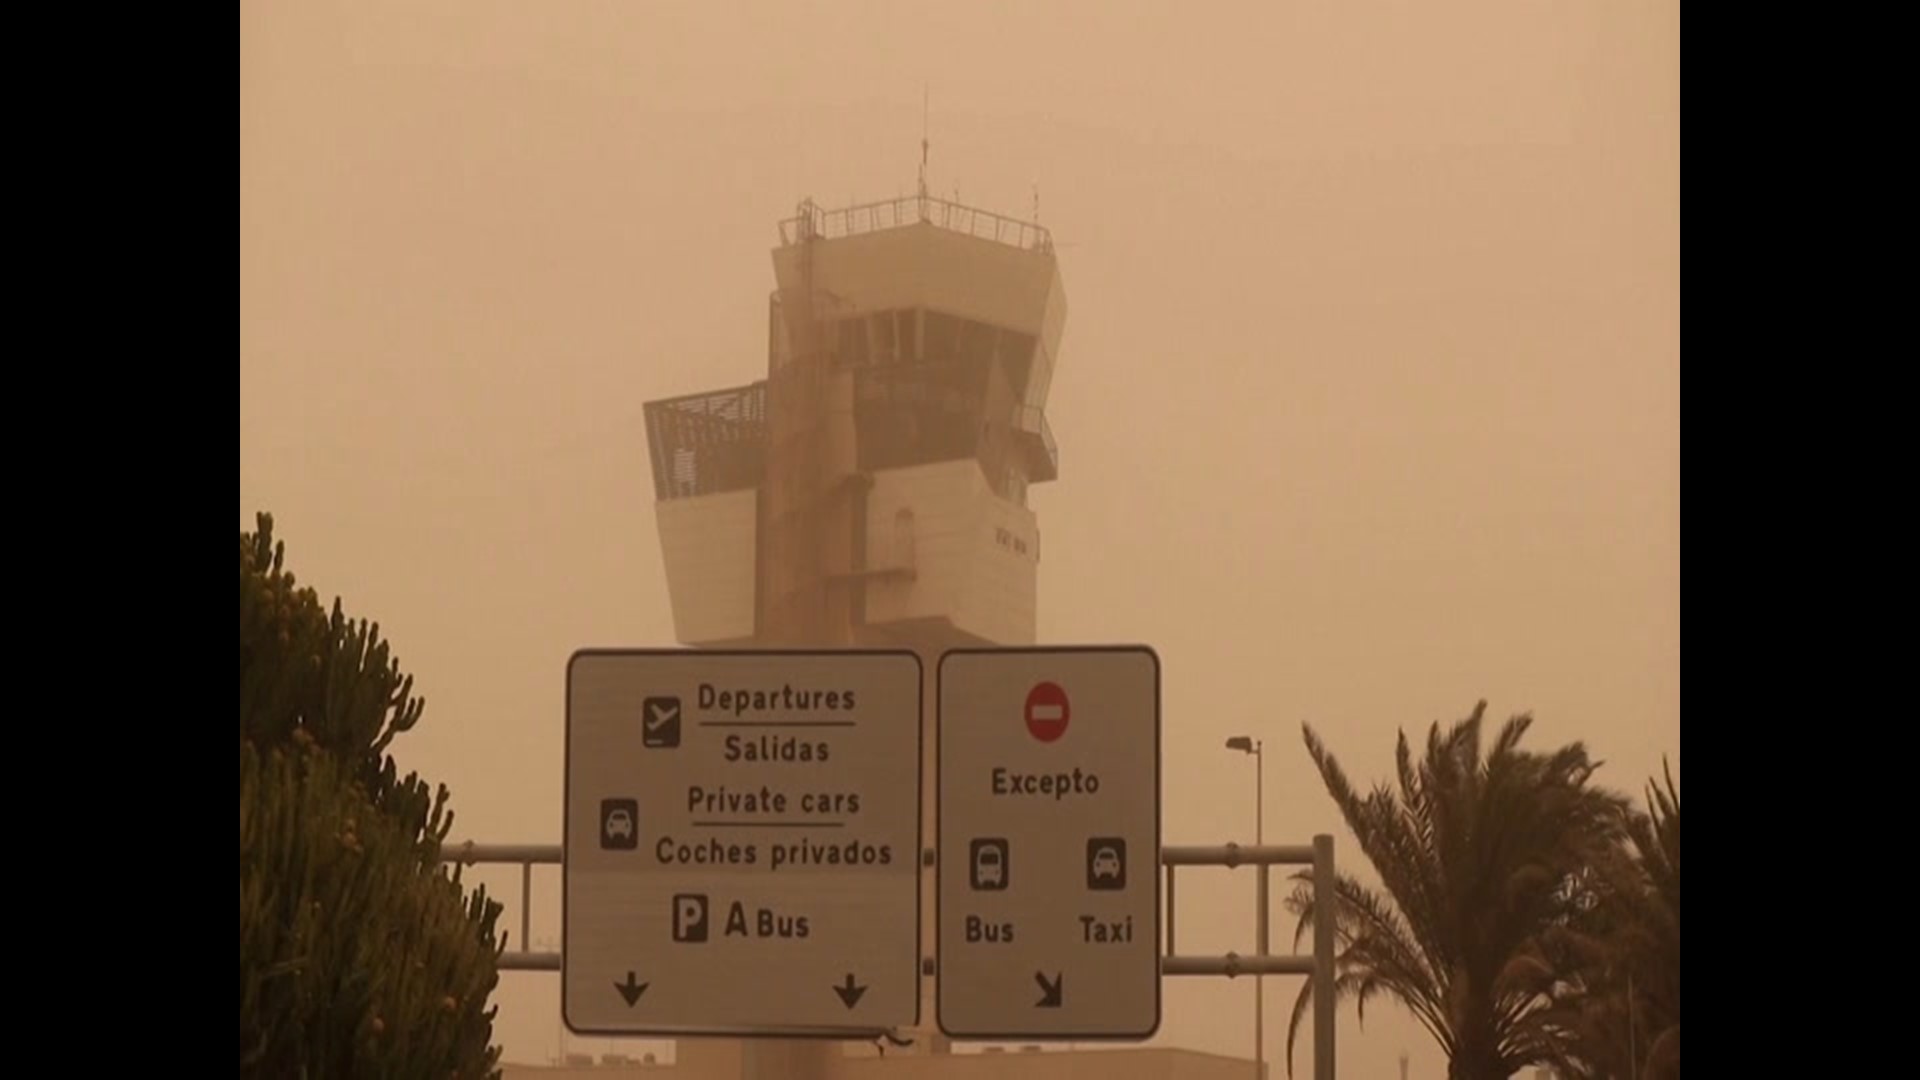 All flights in and out of the Spanish Canary Island of Gran Canaria were suspended on Feb. 22 after a sandstorm from the Sahara hit the Canaries.